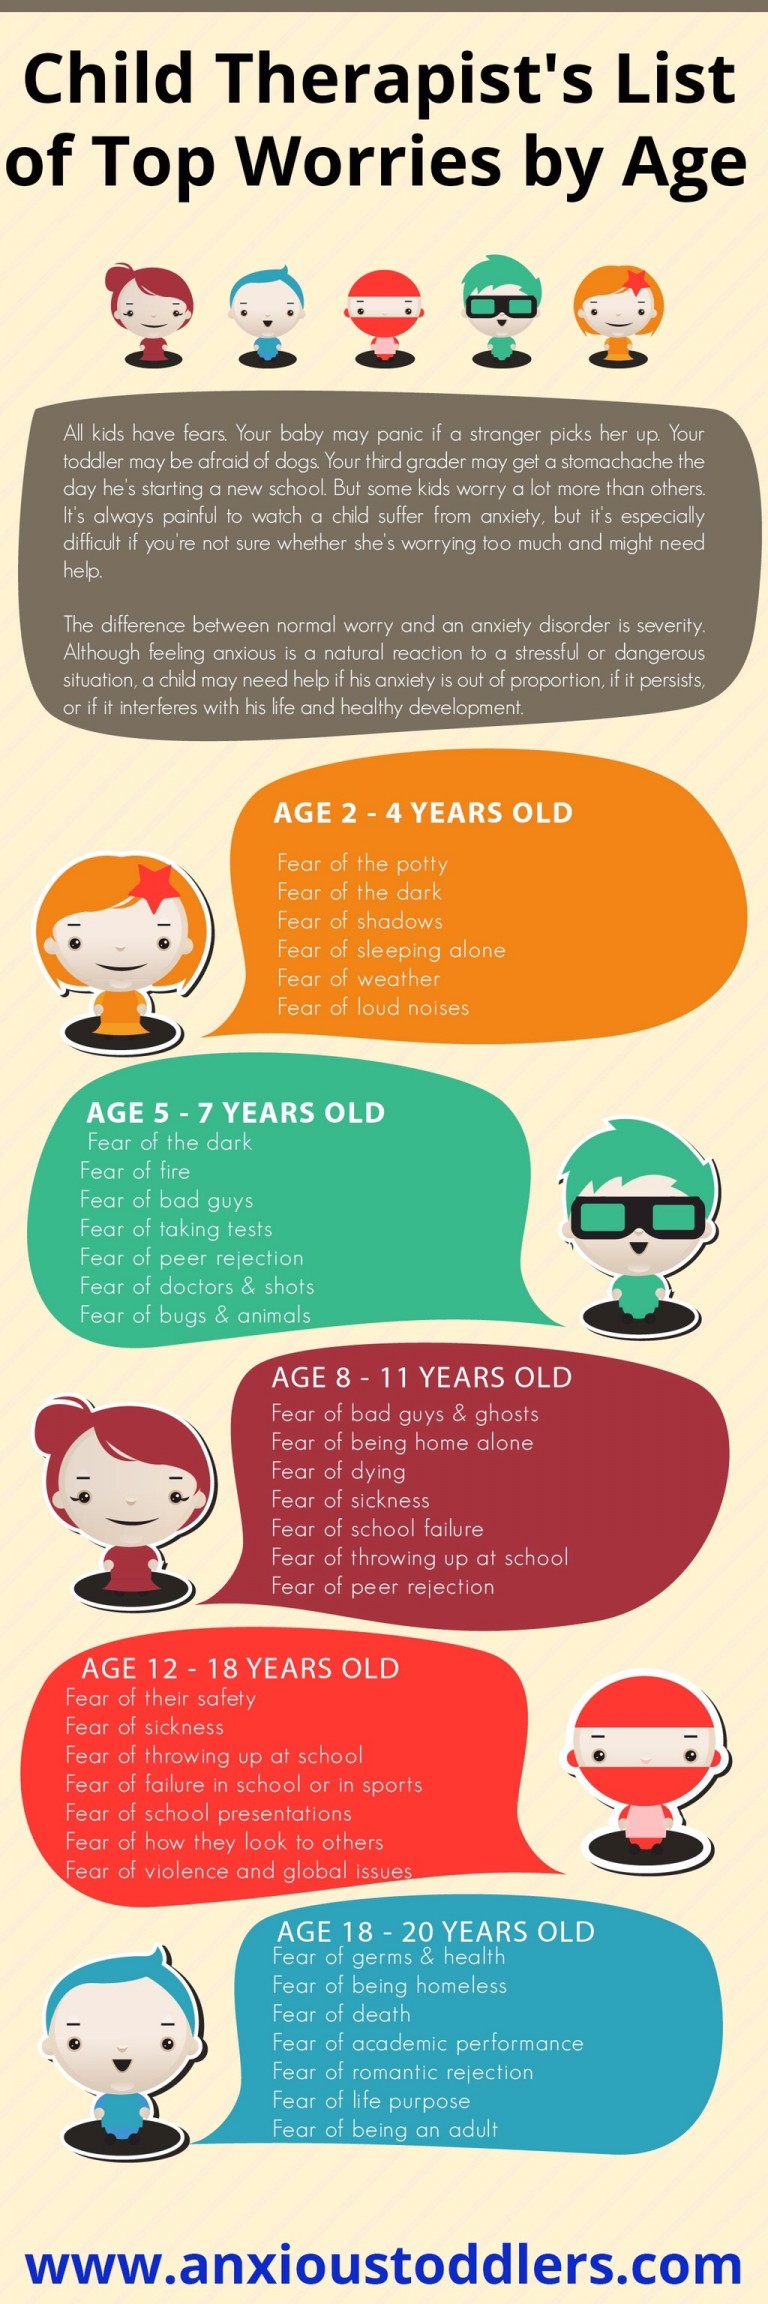 Infographic: Child Therapist’s List of Top Worries by Age